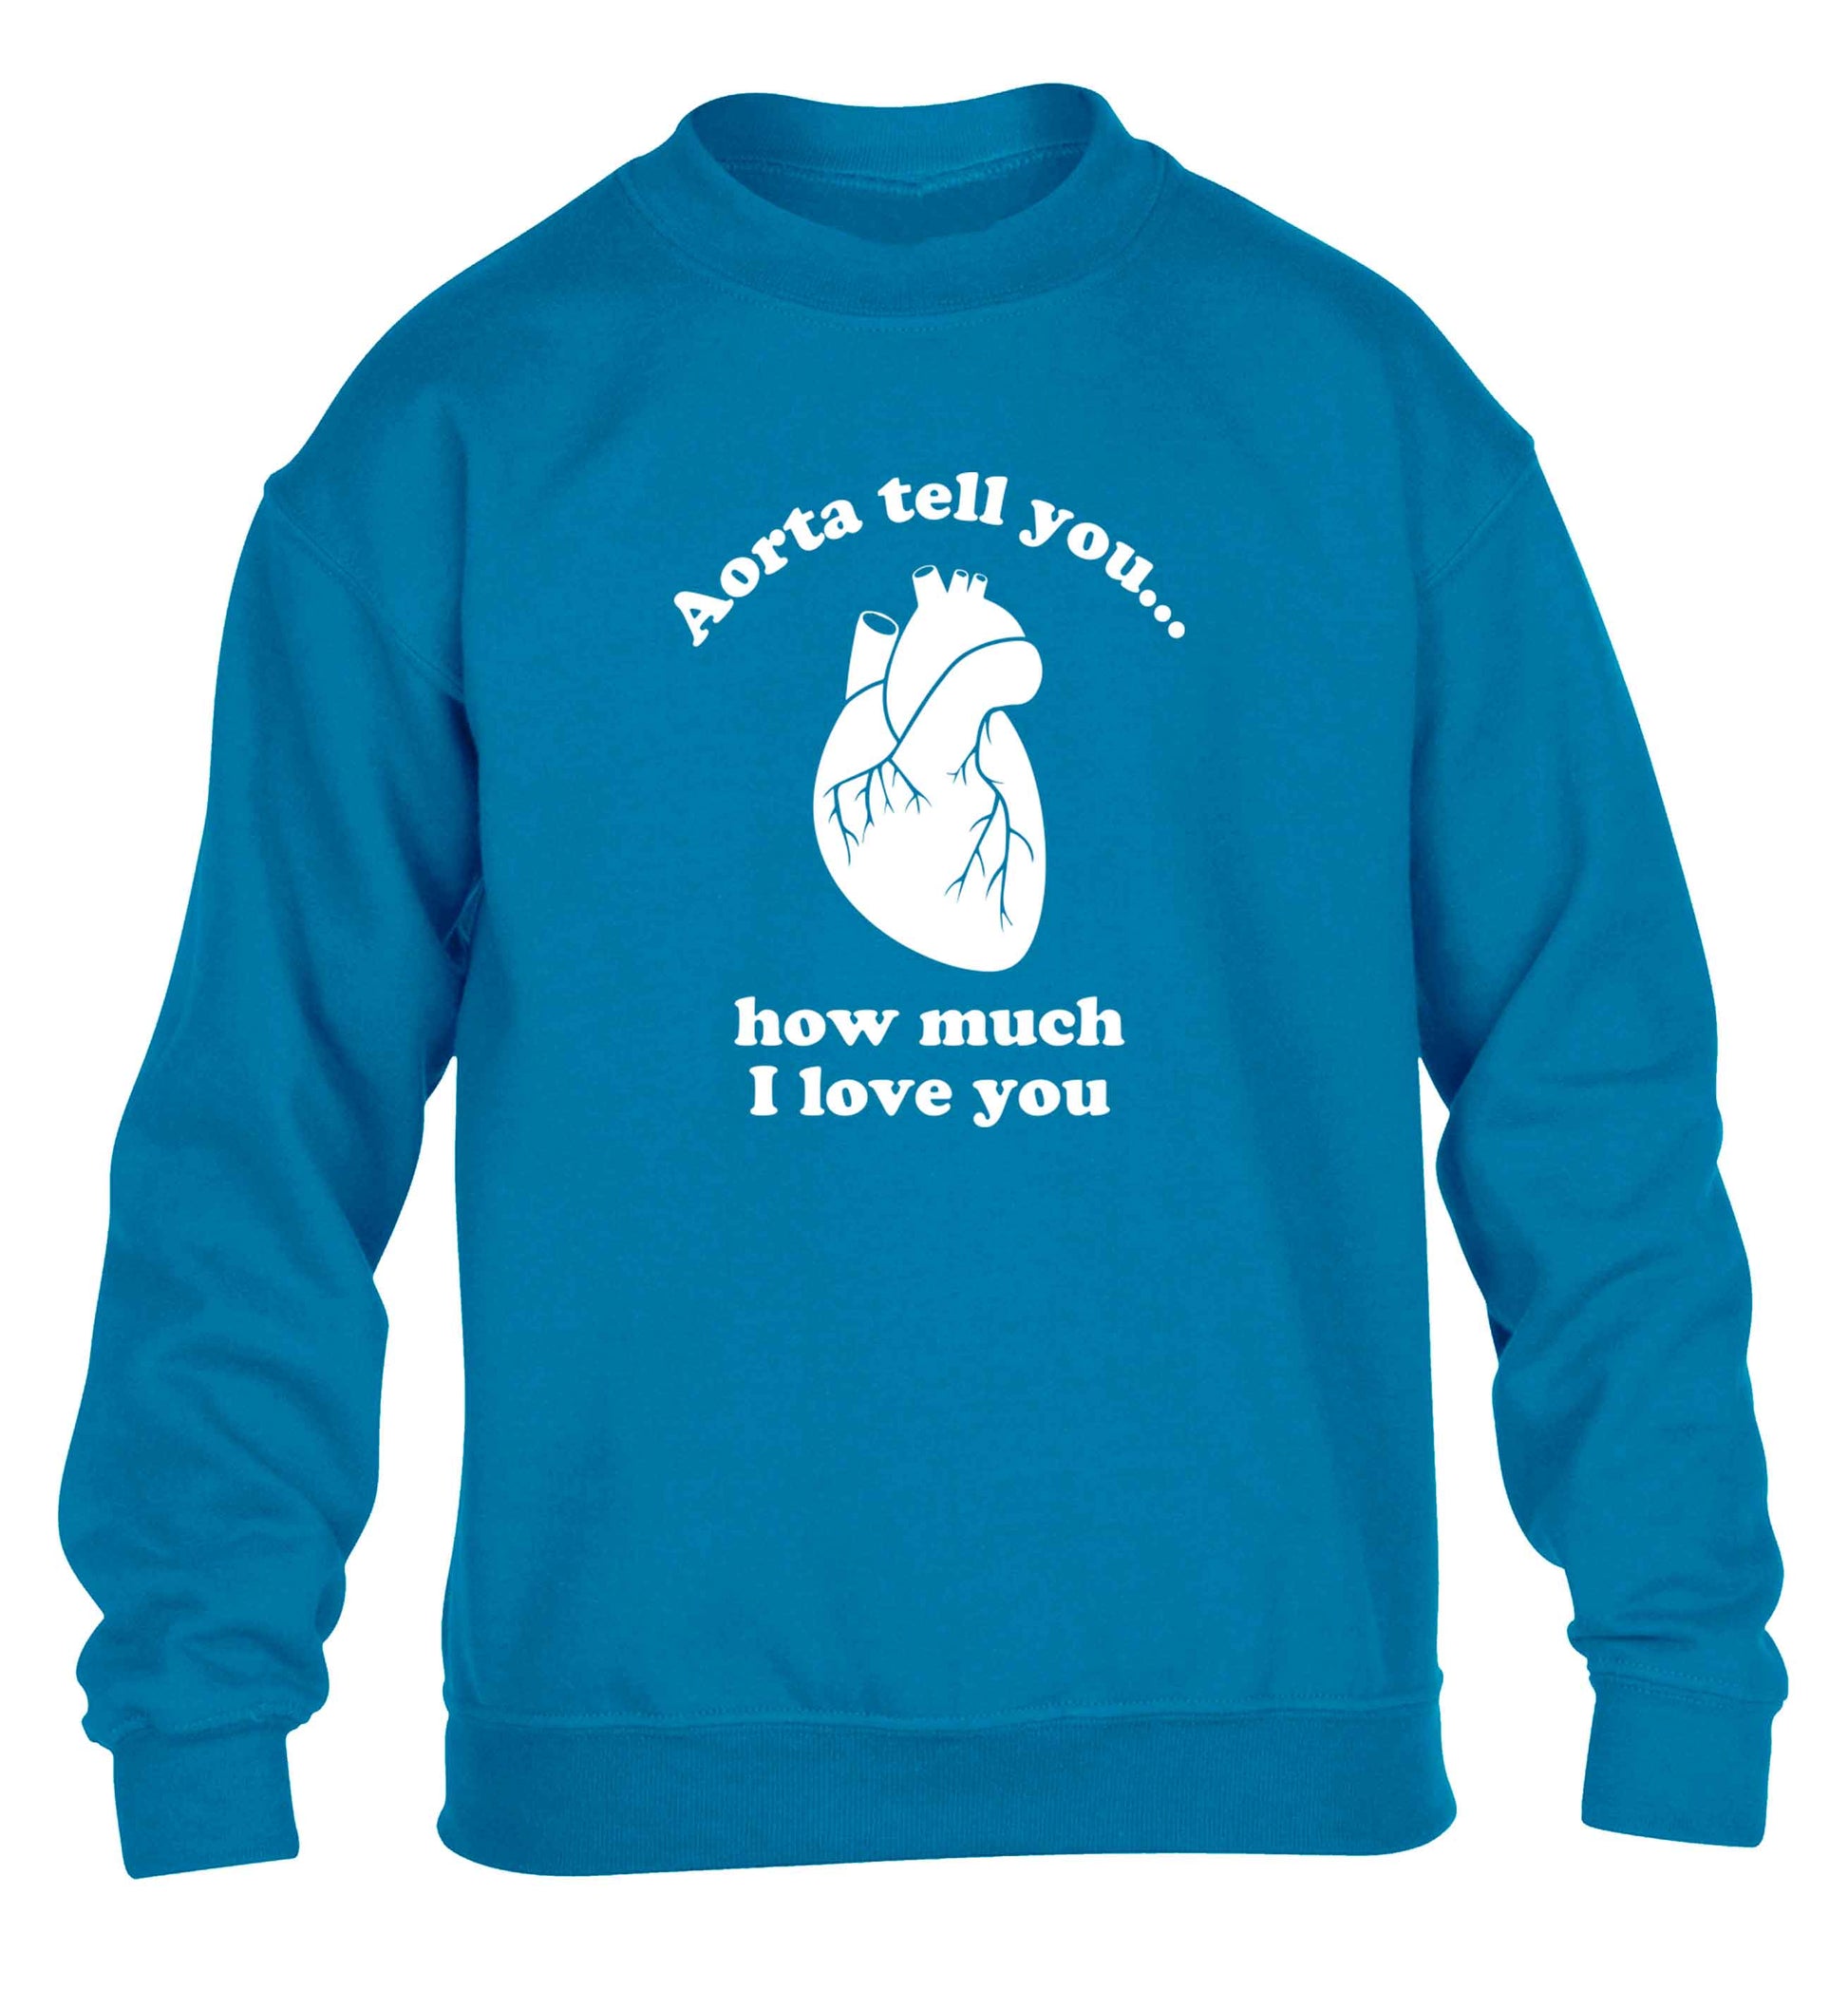 Aorta tell you how much I love you children's blue sweater 12-13 Years